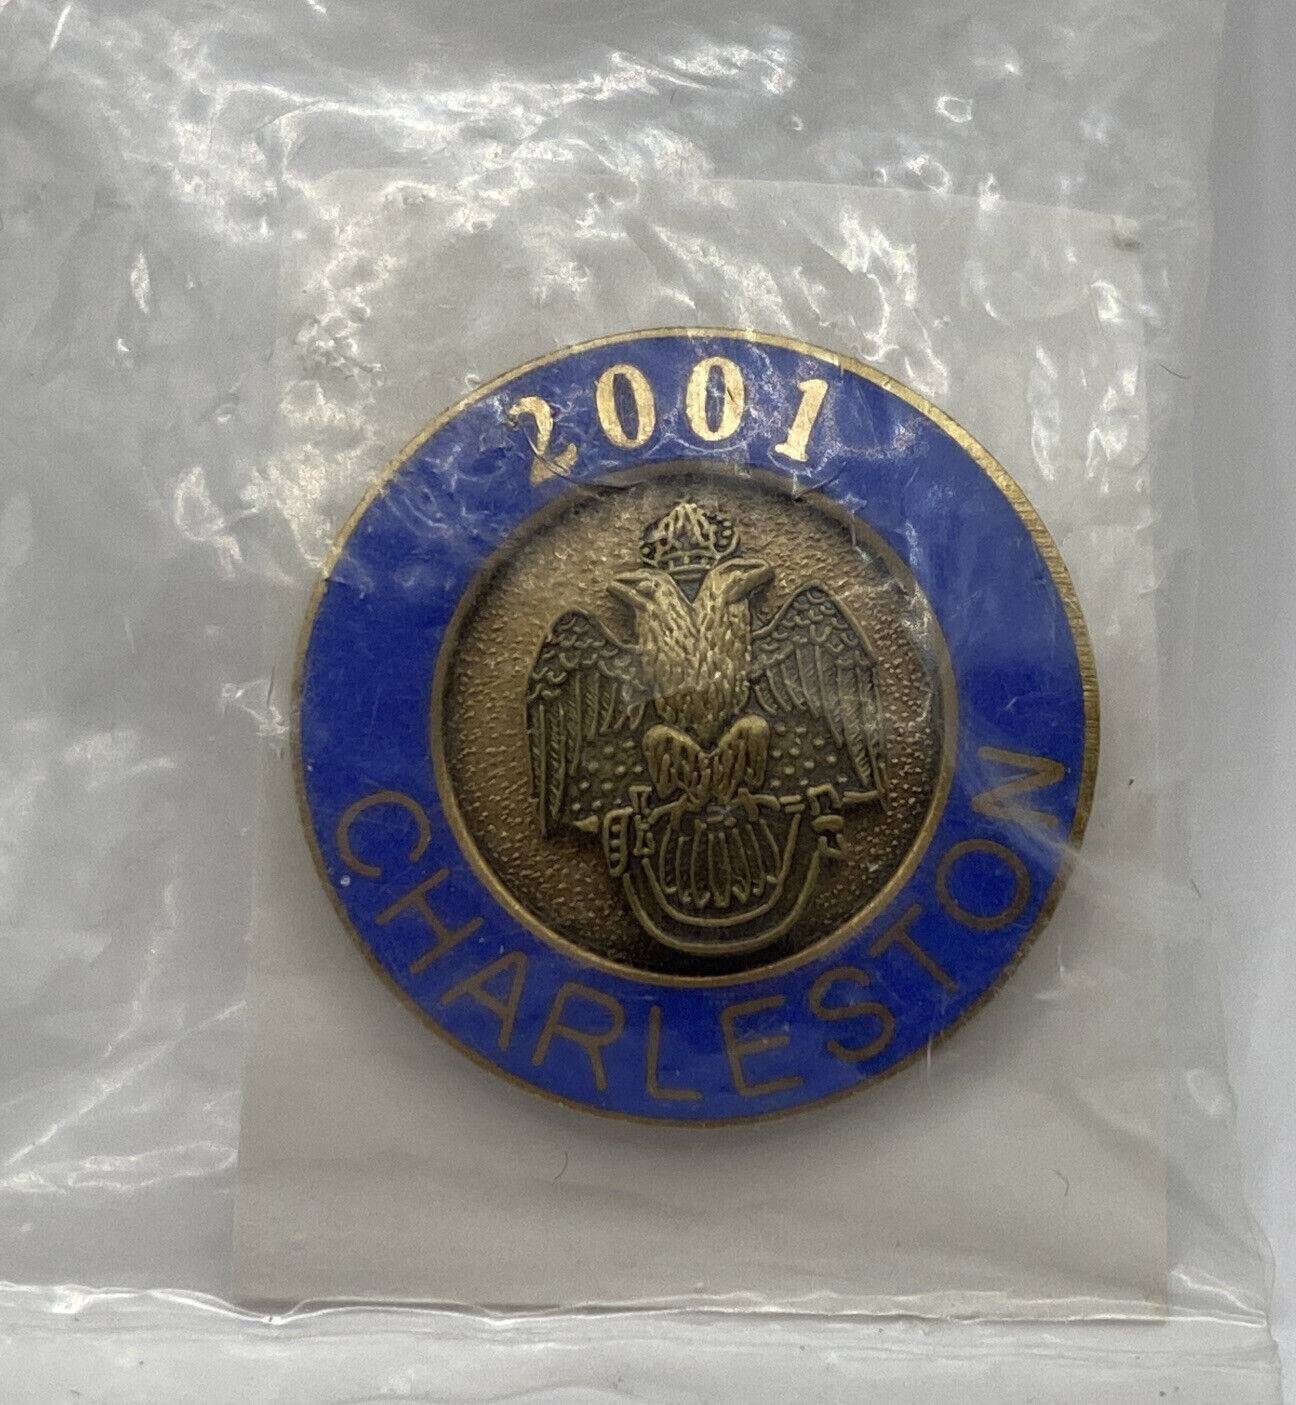 2001 Charleston Masonic Eagle Pin - Blue - New In Package 